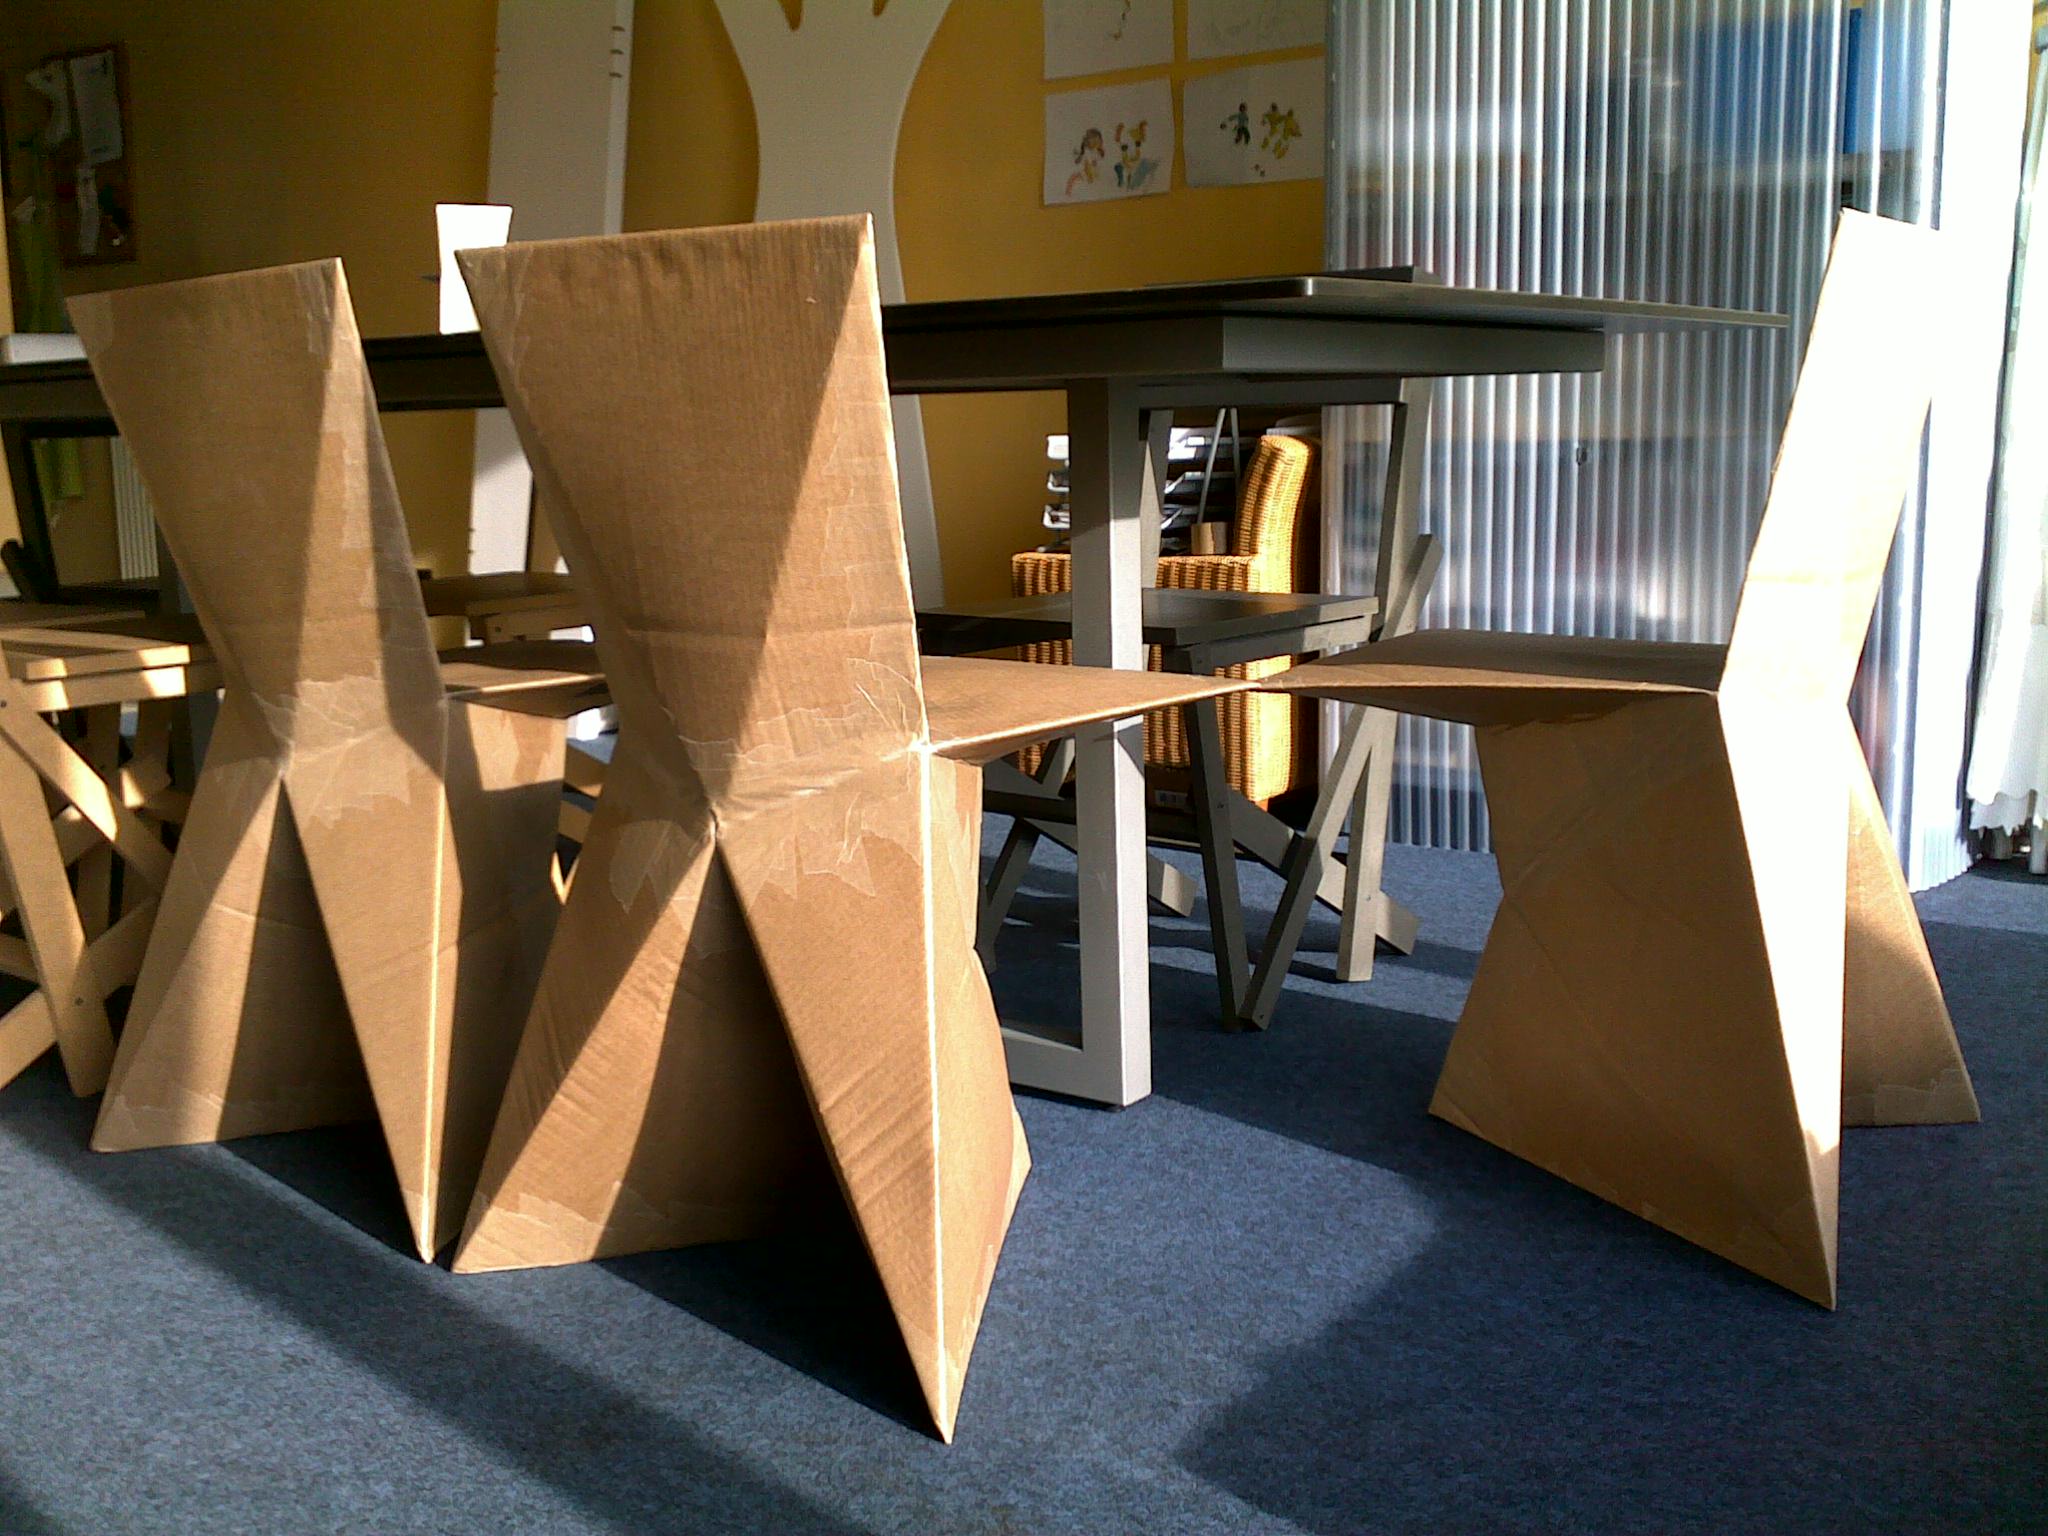 Make Chair Out of Cardboard